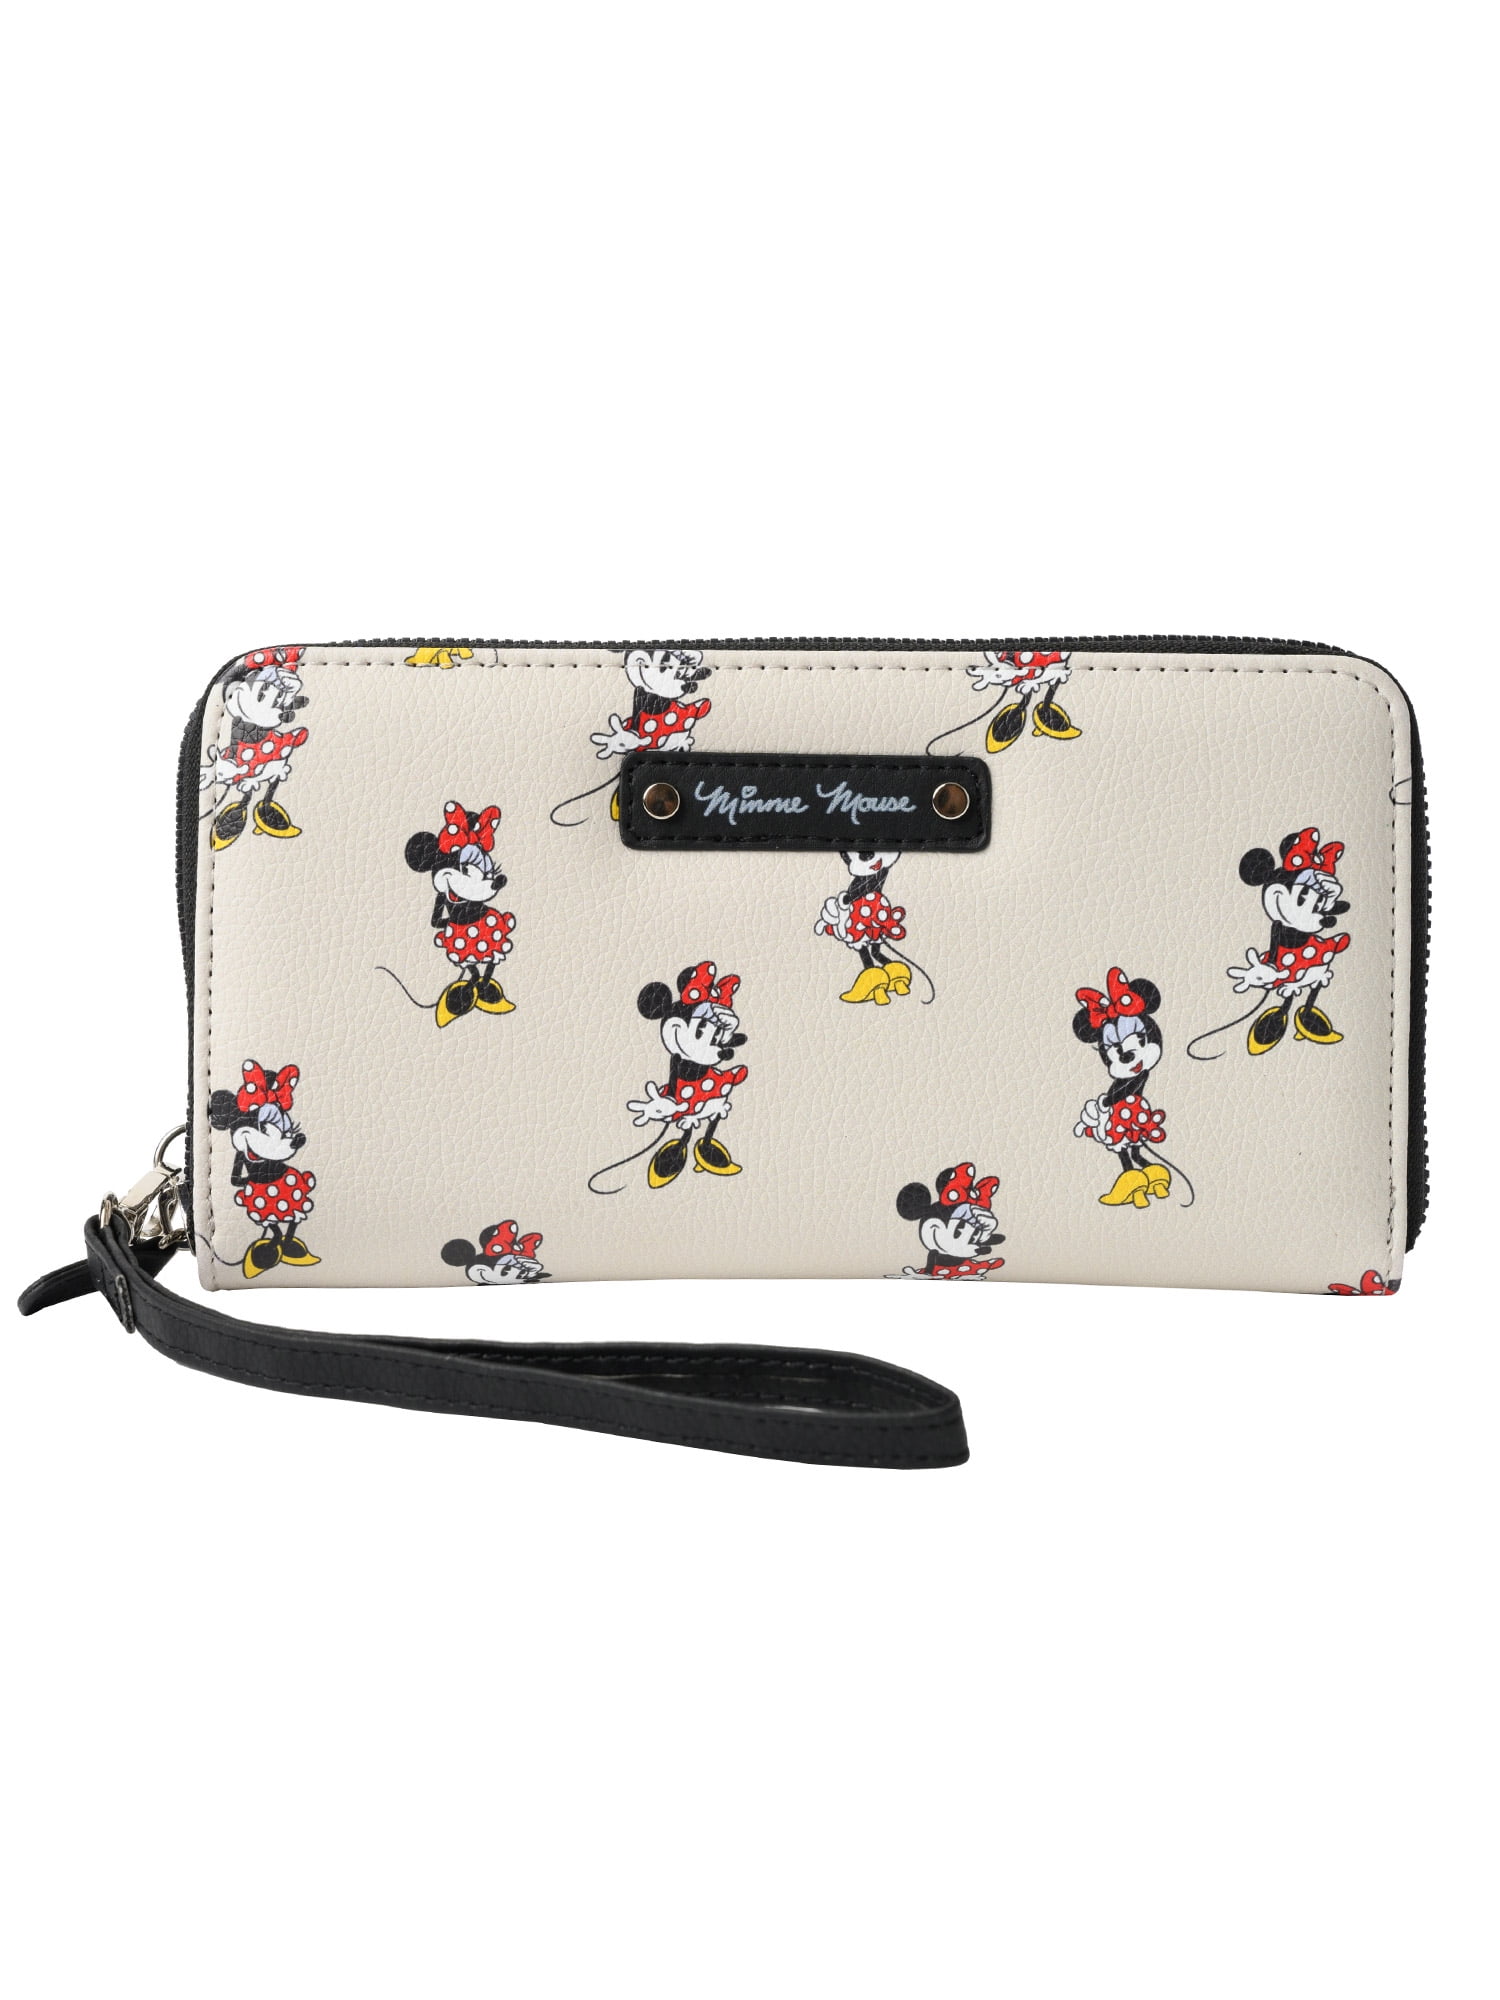 Minnie Mouse Wallet by Loungefly | shopDisney